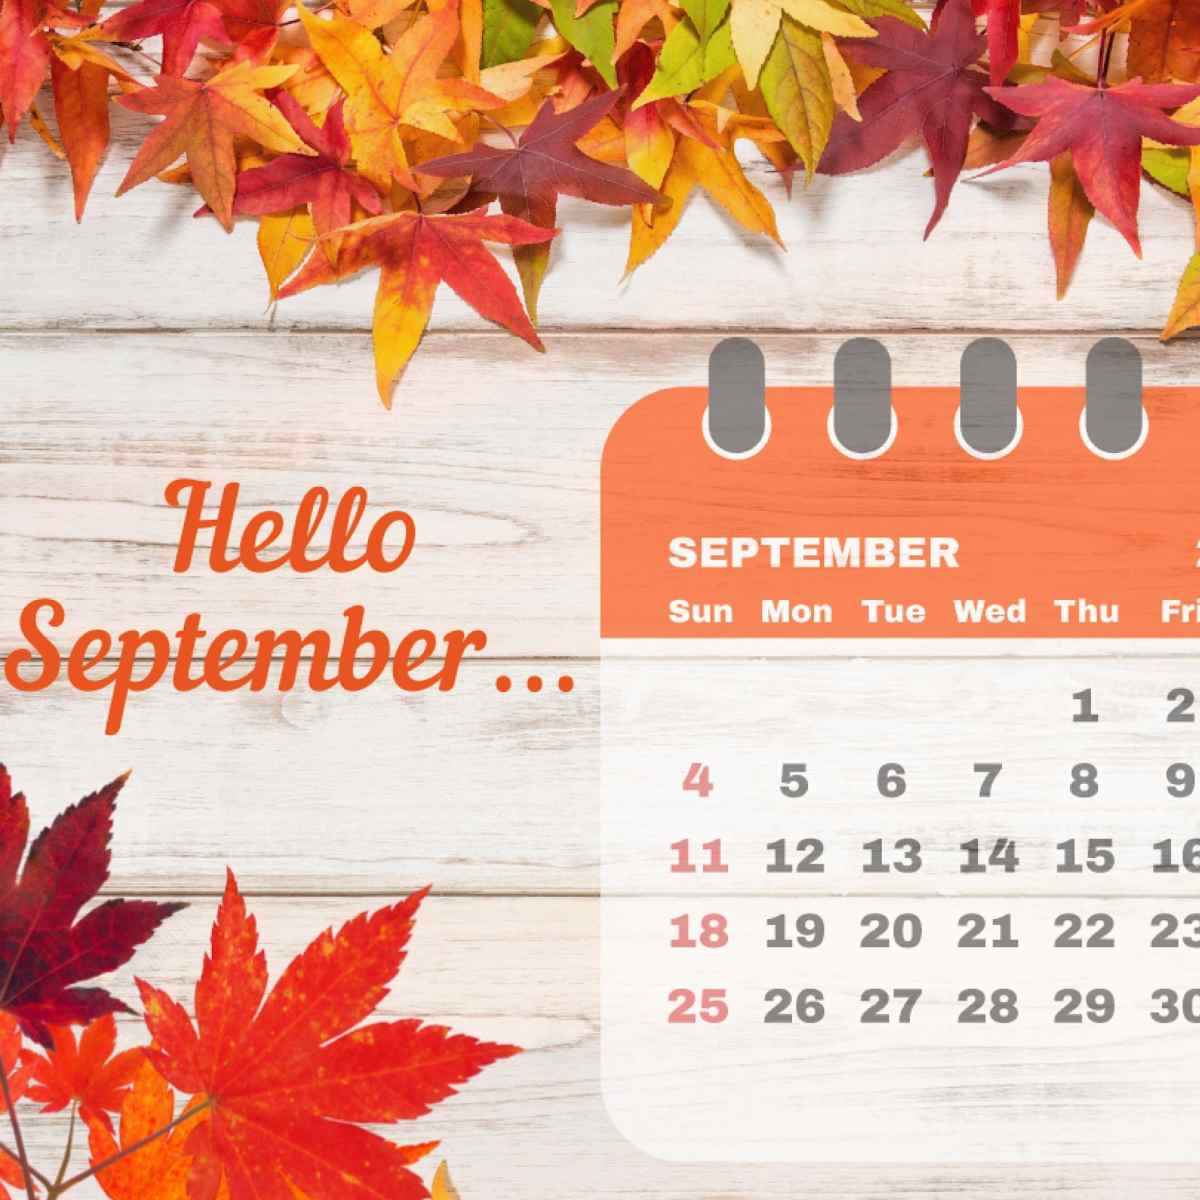 A September calendar surrounded by leaves and the words "Hello September..." to represent all the amazing national days this month.